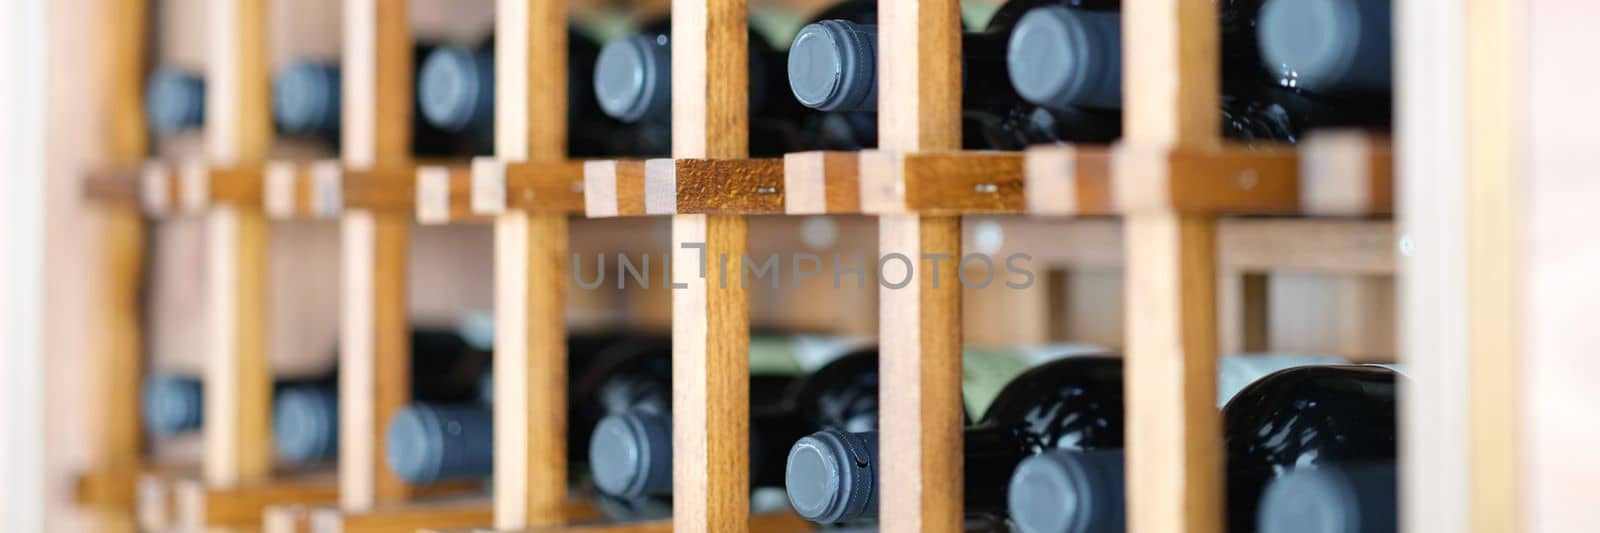 Homemade wine cellar with wooden boxes for storing bottles by kuprevich